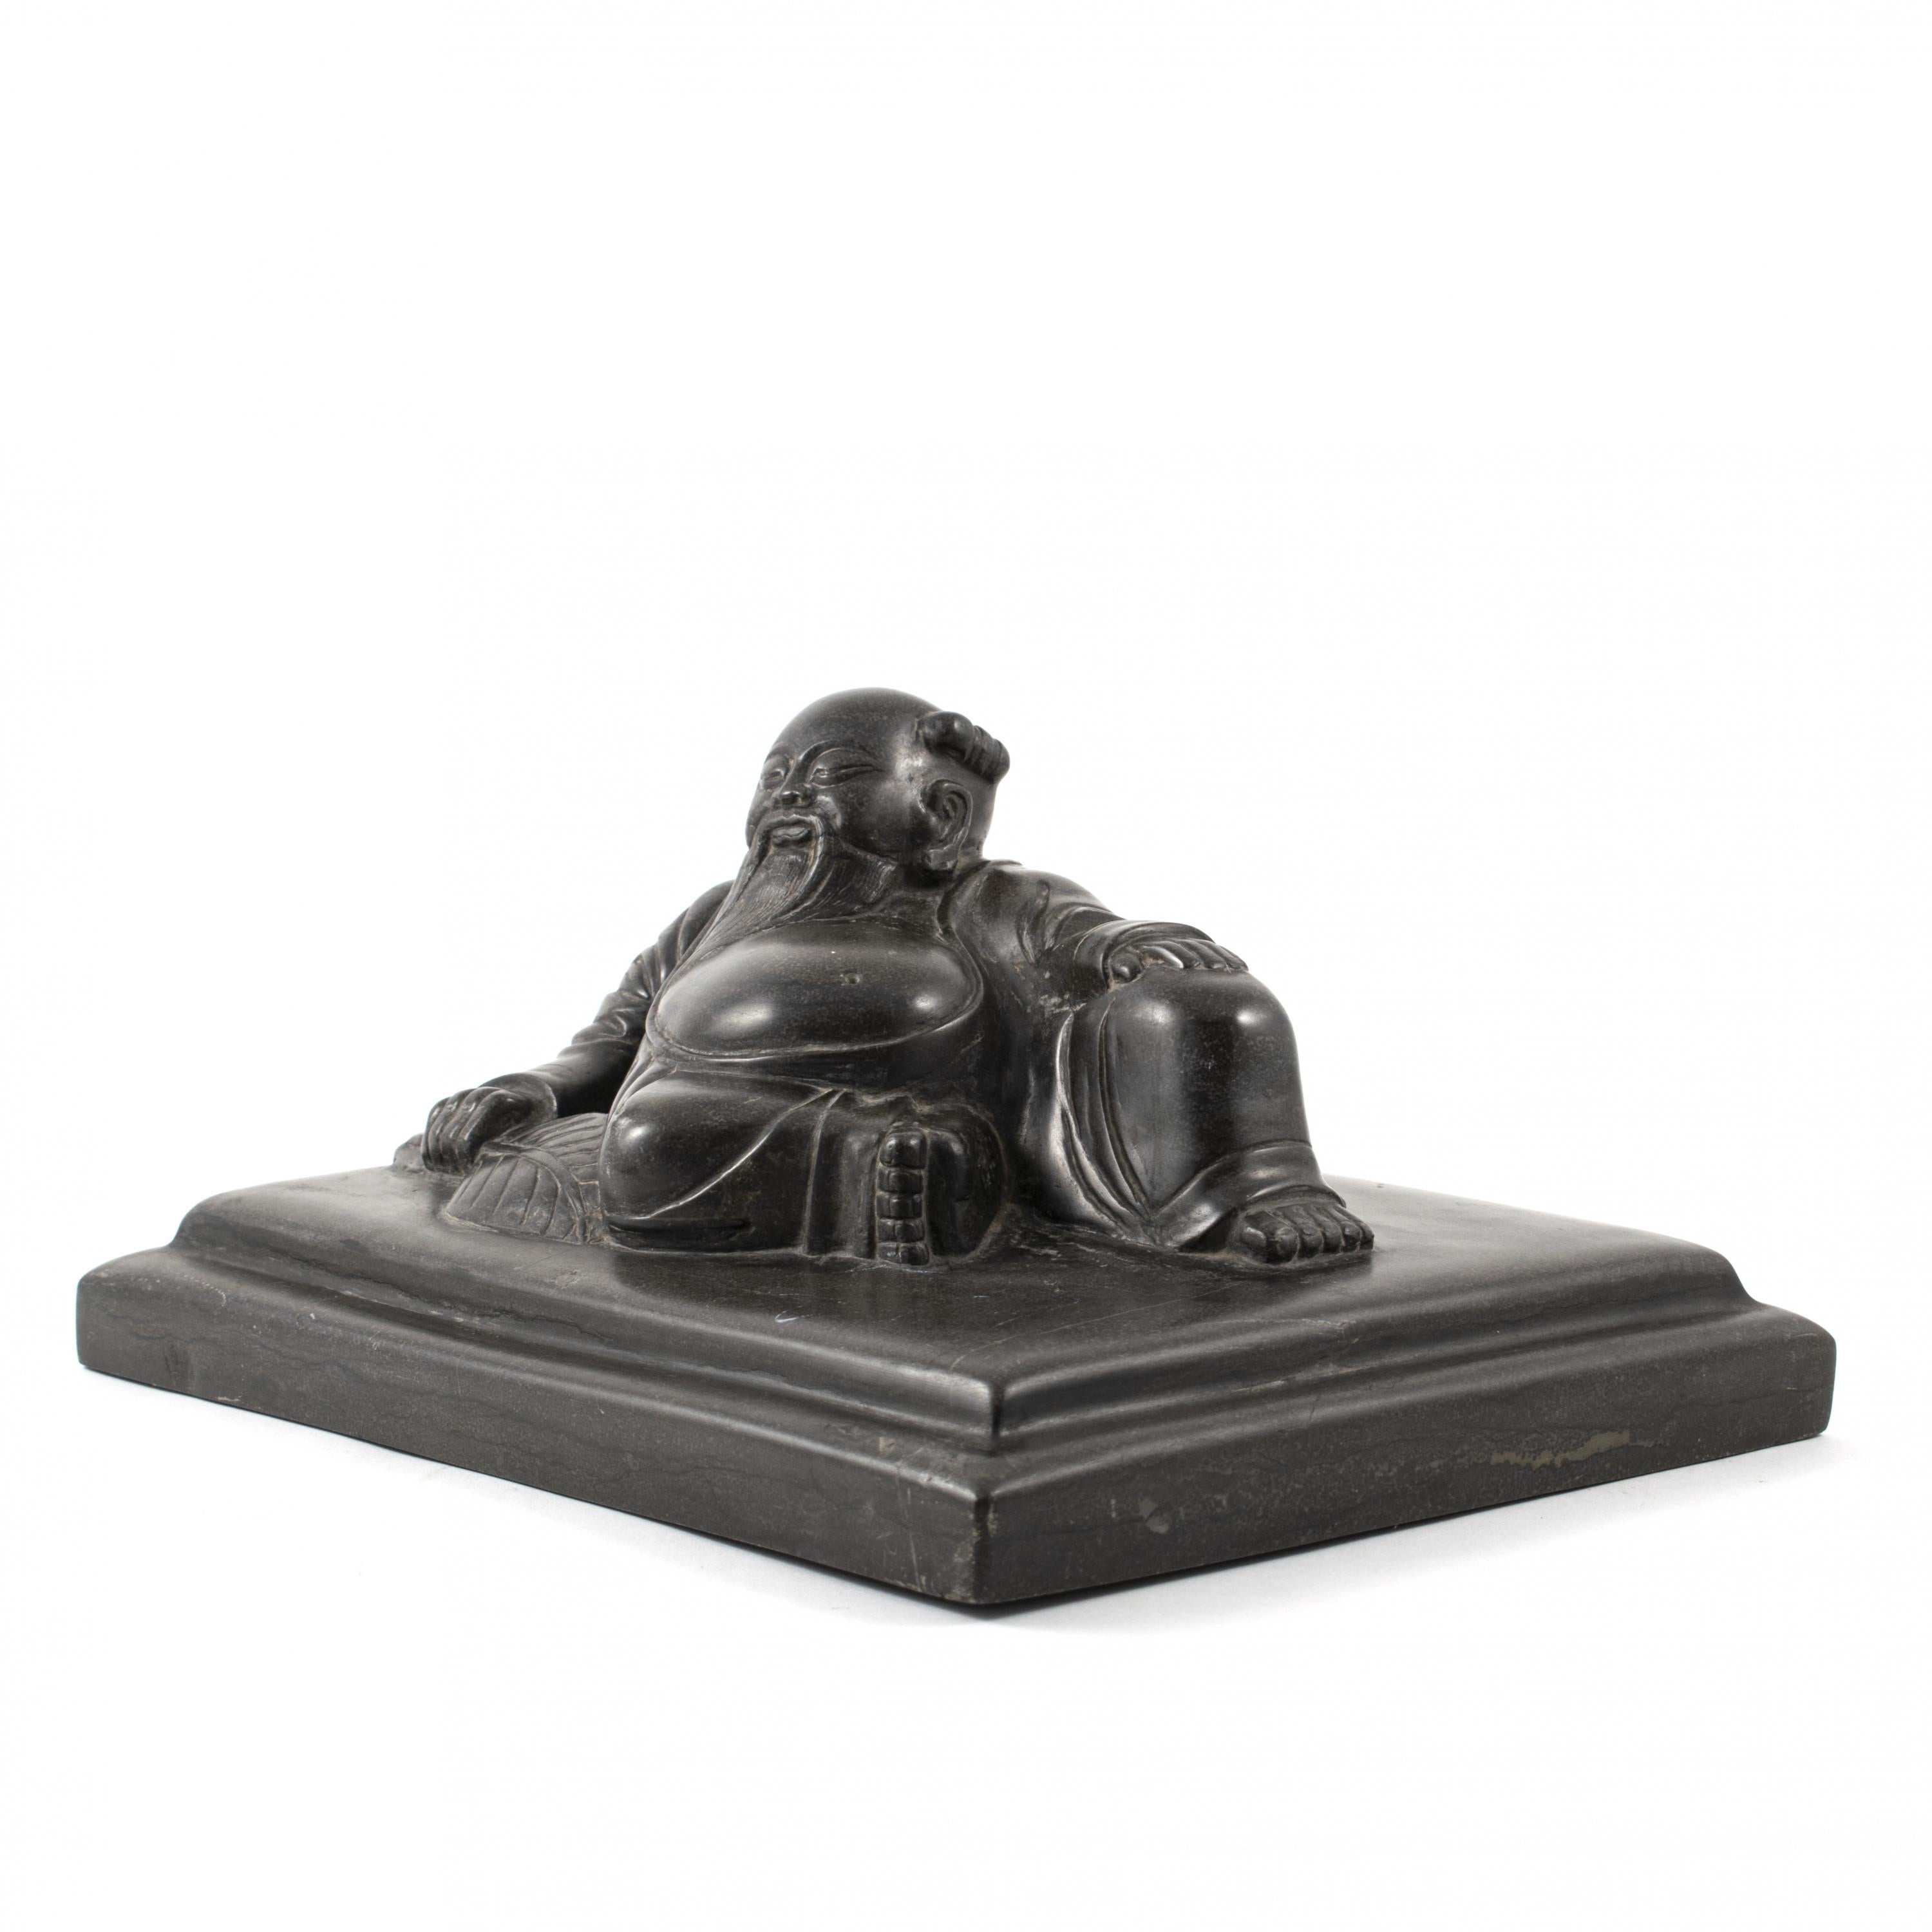 18th-19th century Chinese carved stone sculpture depicting a Happy Buddha.
Carved from a solid piece of black stone, this weight was originally used by a Shoemaker. After layers of fabrics are binder and glued, weights like these were put on top to